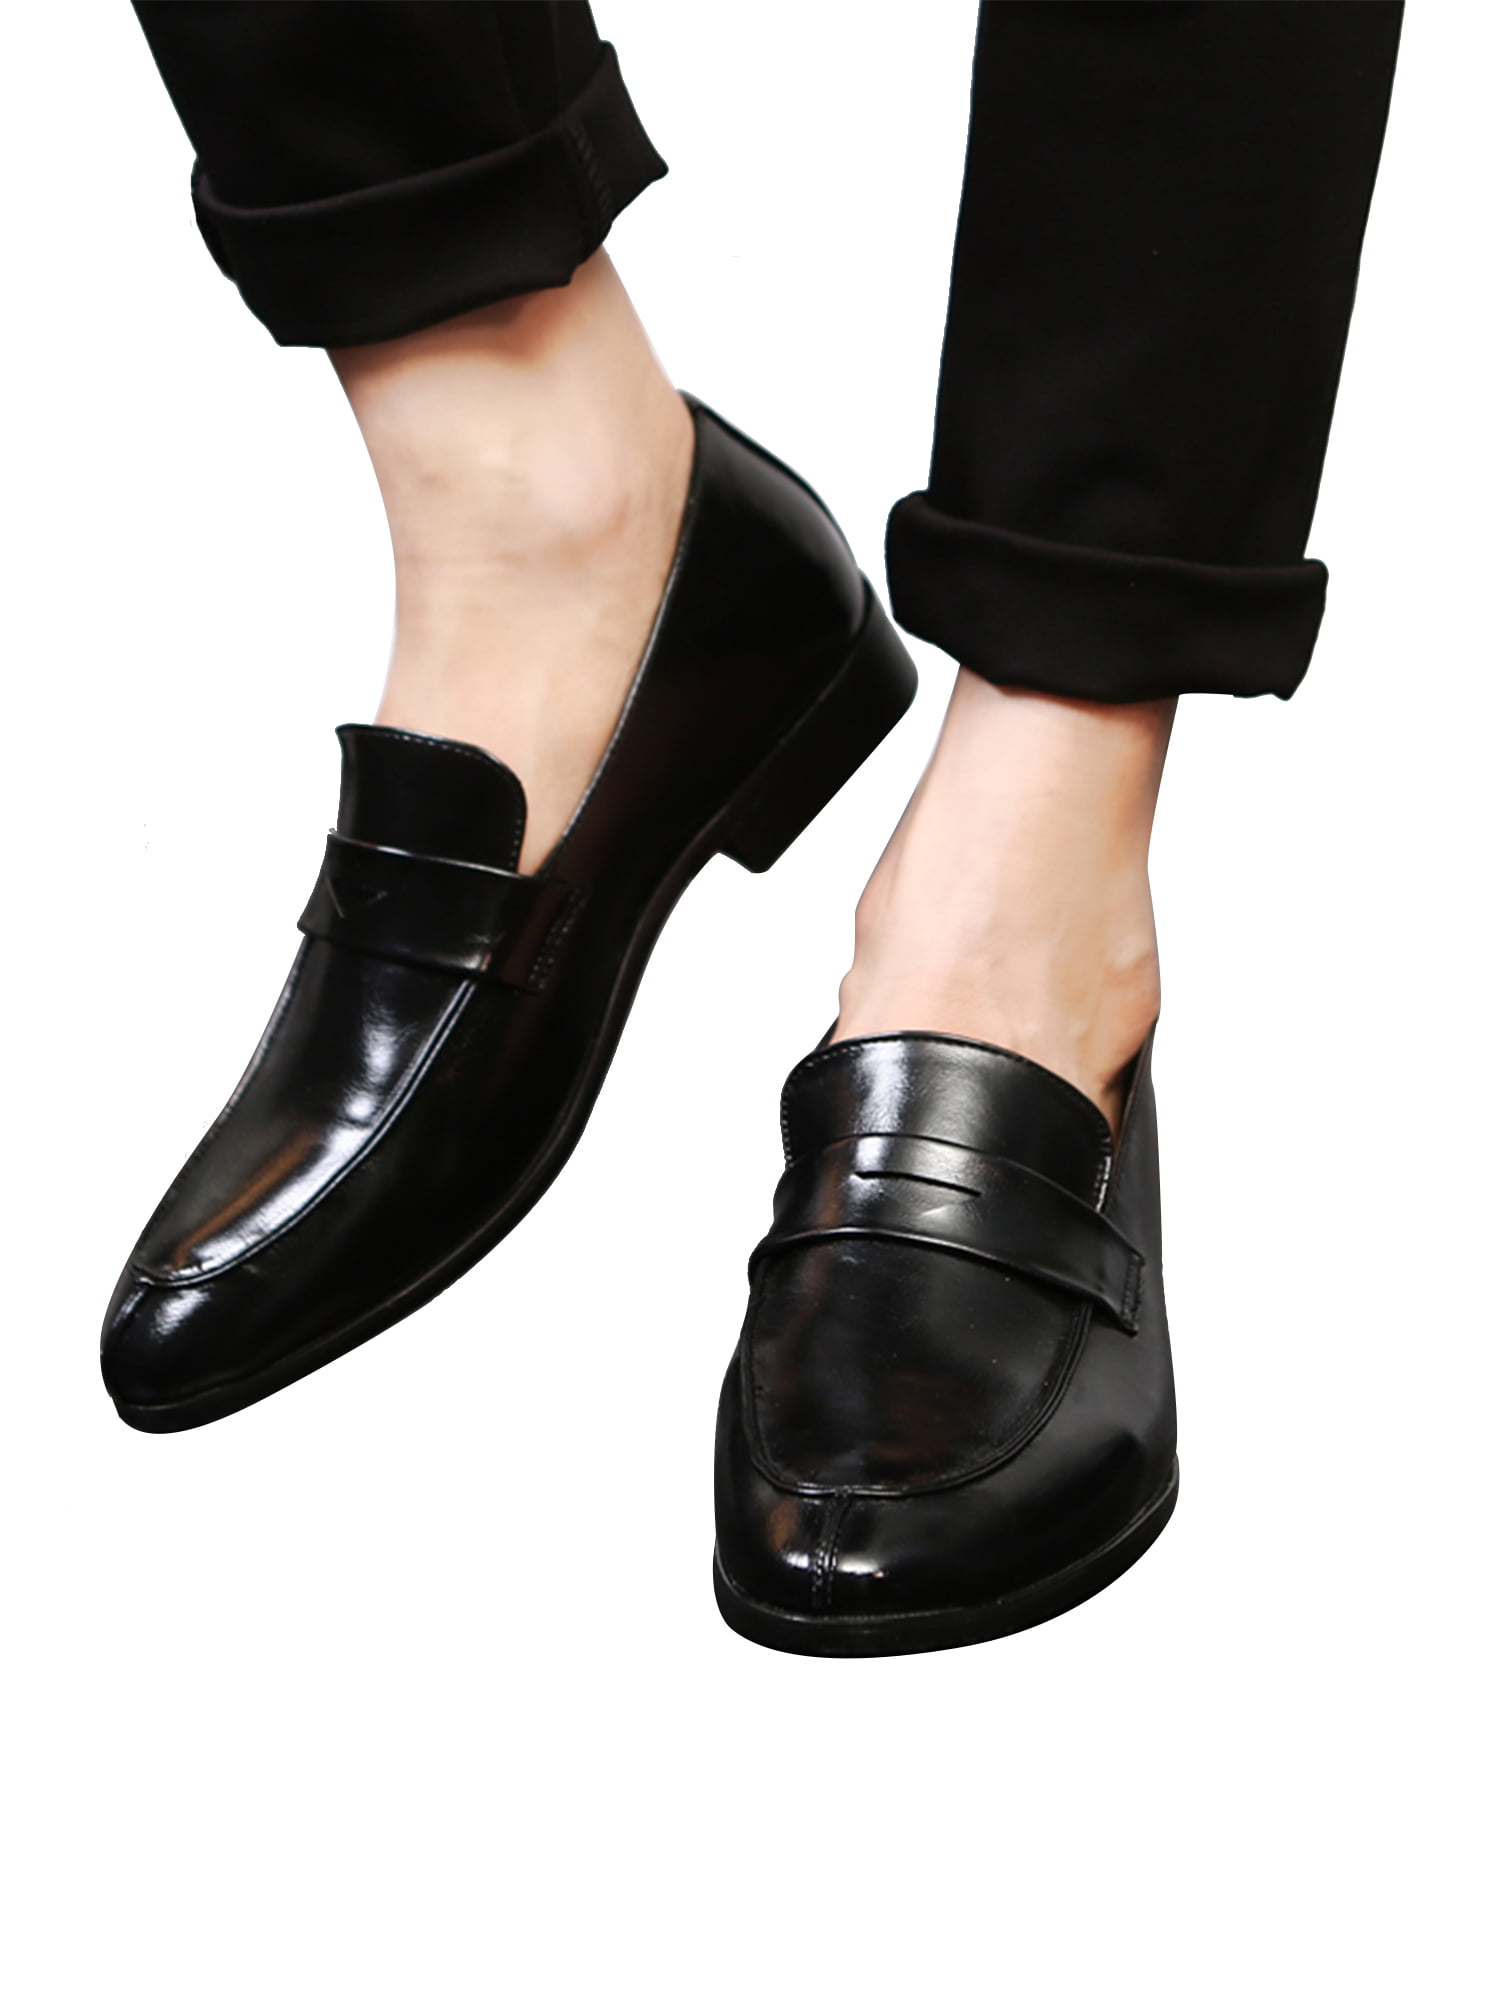 Men's Slip On Pointed Toe Stylish Loafers Dress Formal Patent Leather Shoes US